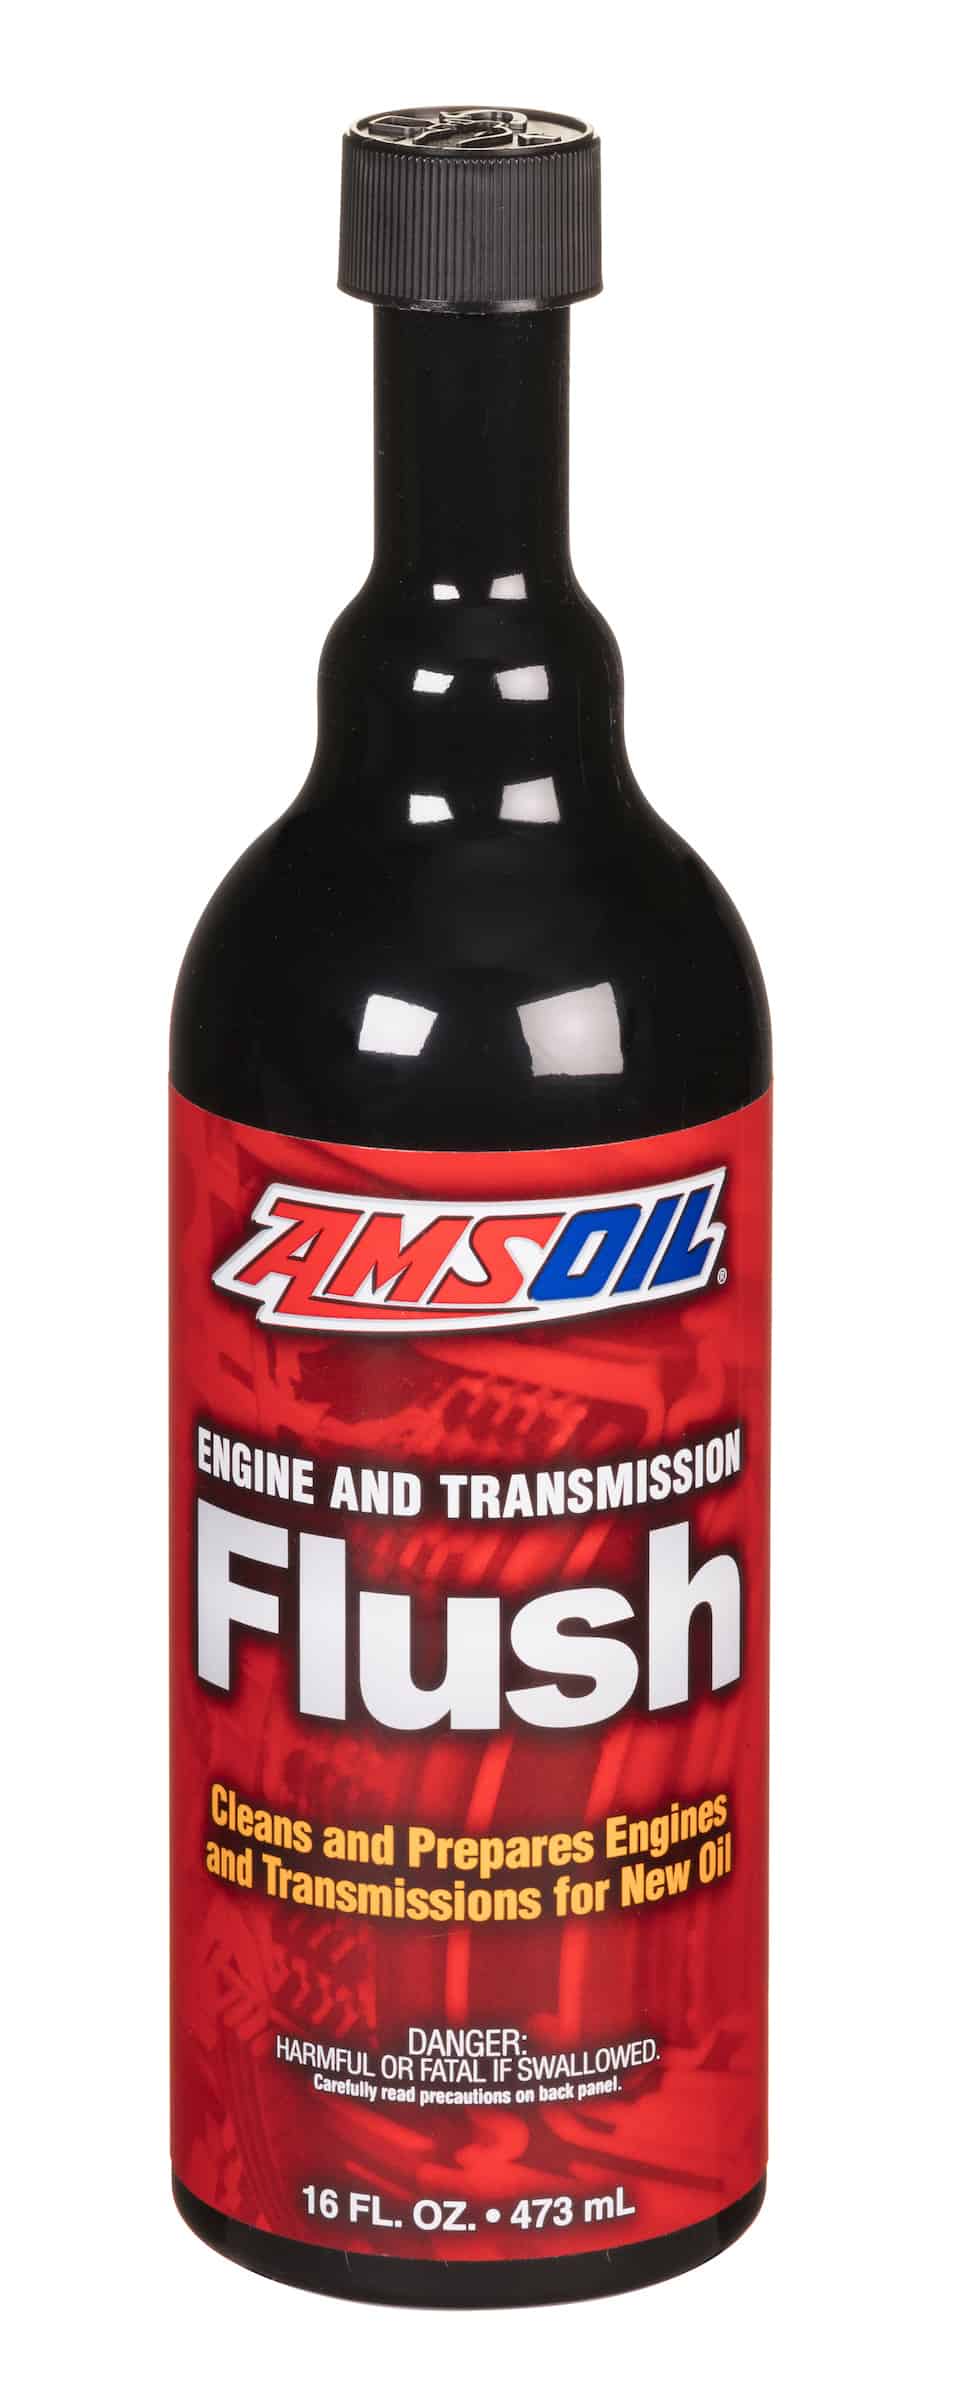 A bottle of AMSOIL Engine & Transmission Flush, which helps to restore fuel economy, increases operating efficiency, reduces emissions in gasoline and diesel engines.